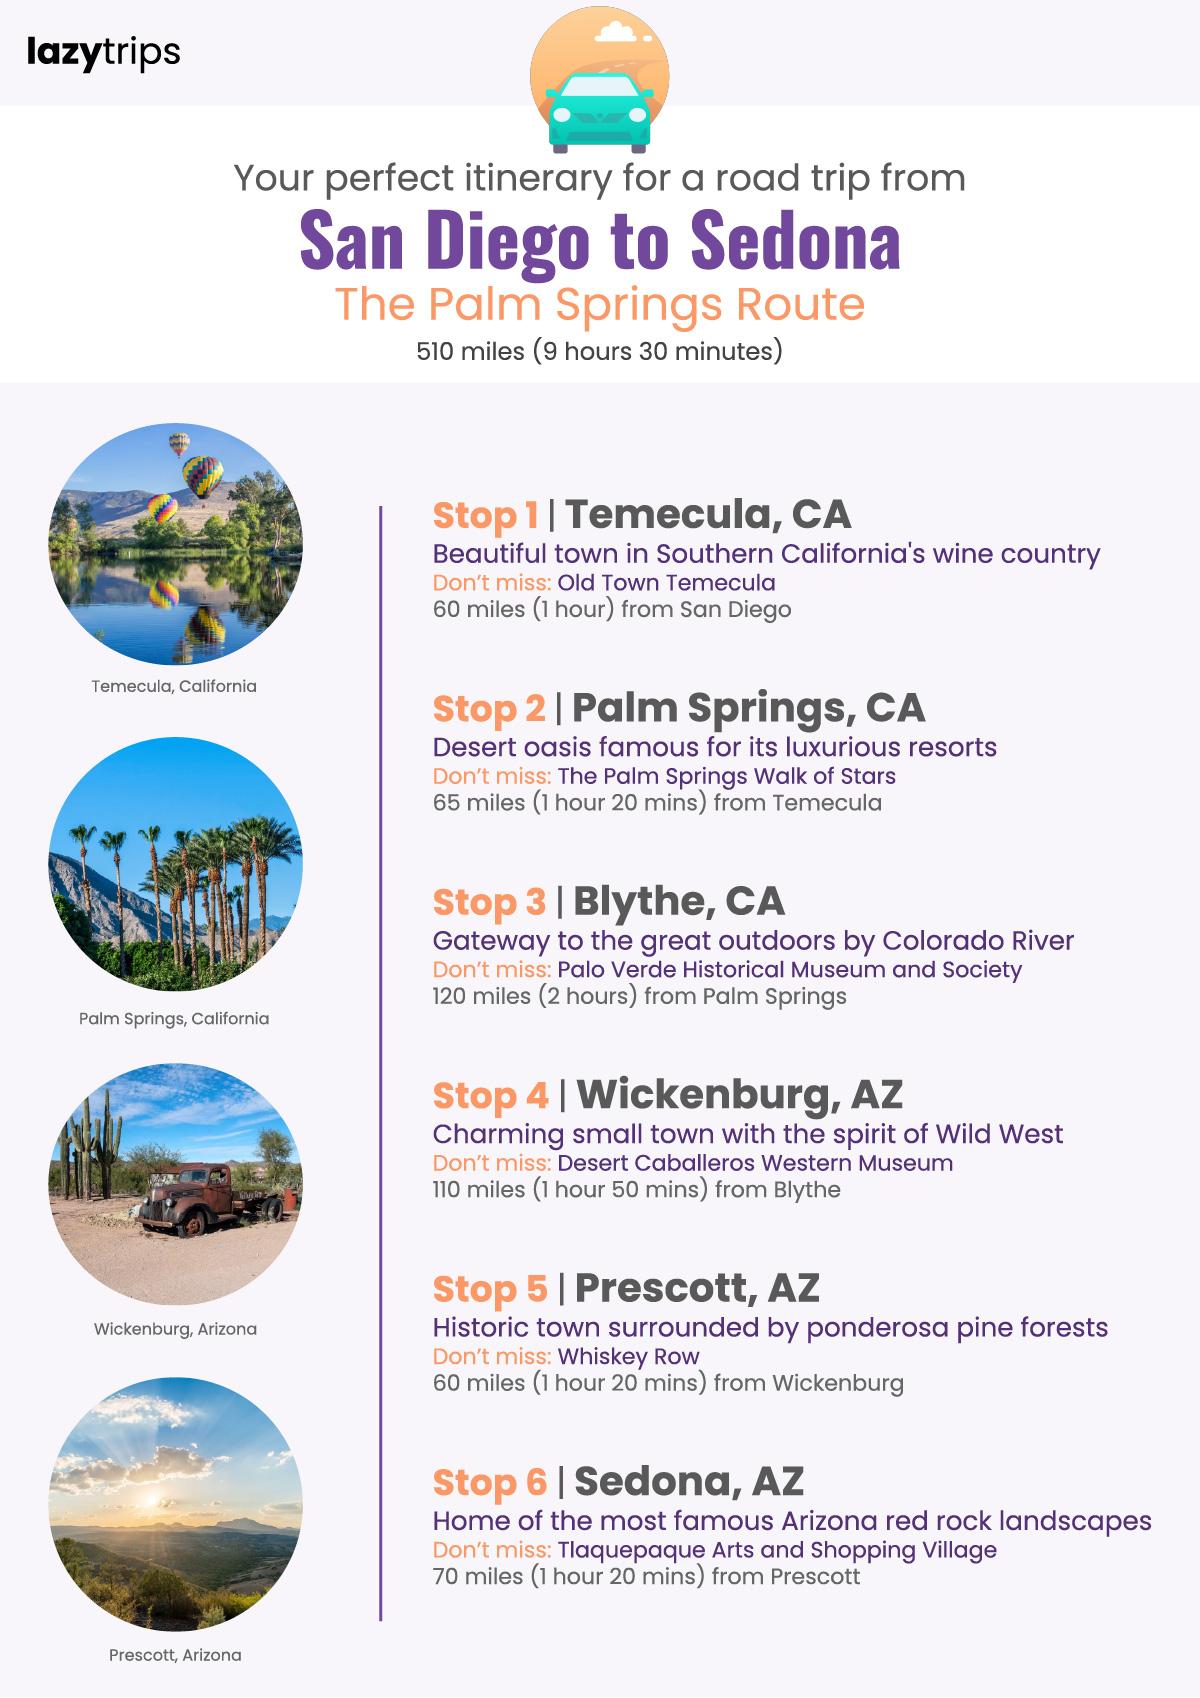 Itinerary for a road trip from San Diego to Sedona, stopping in Temecula, Palm Springs, Blythe, Wickenburg, Prescott and Sedona